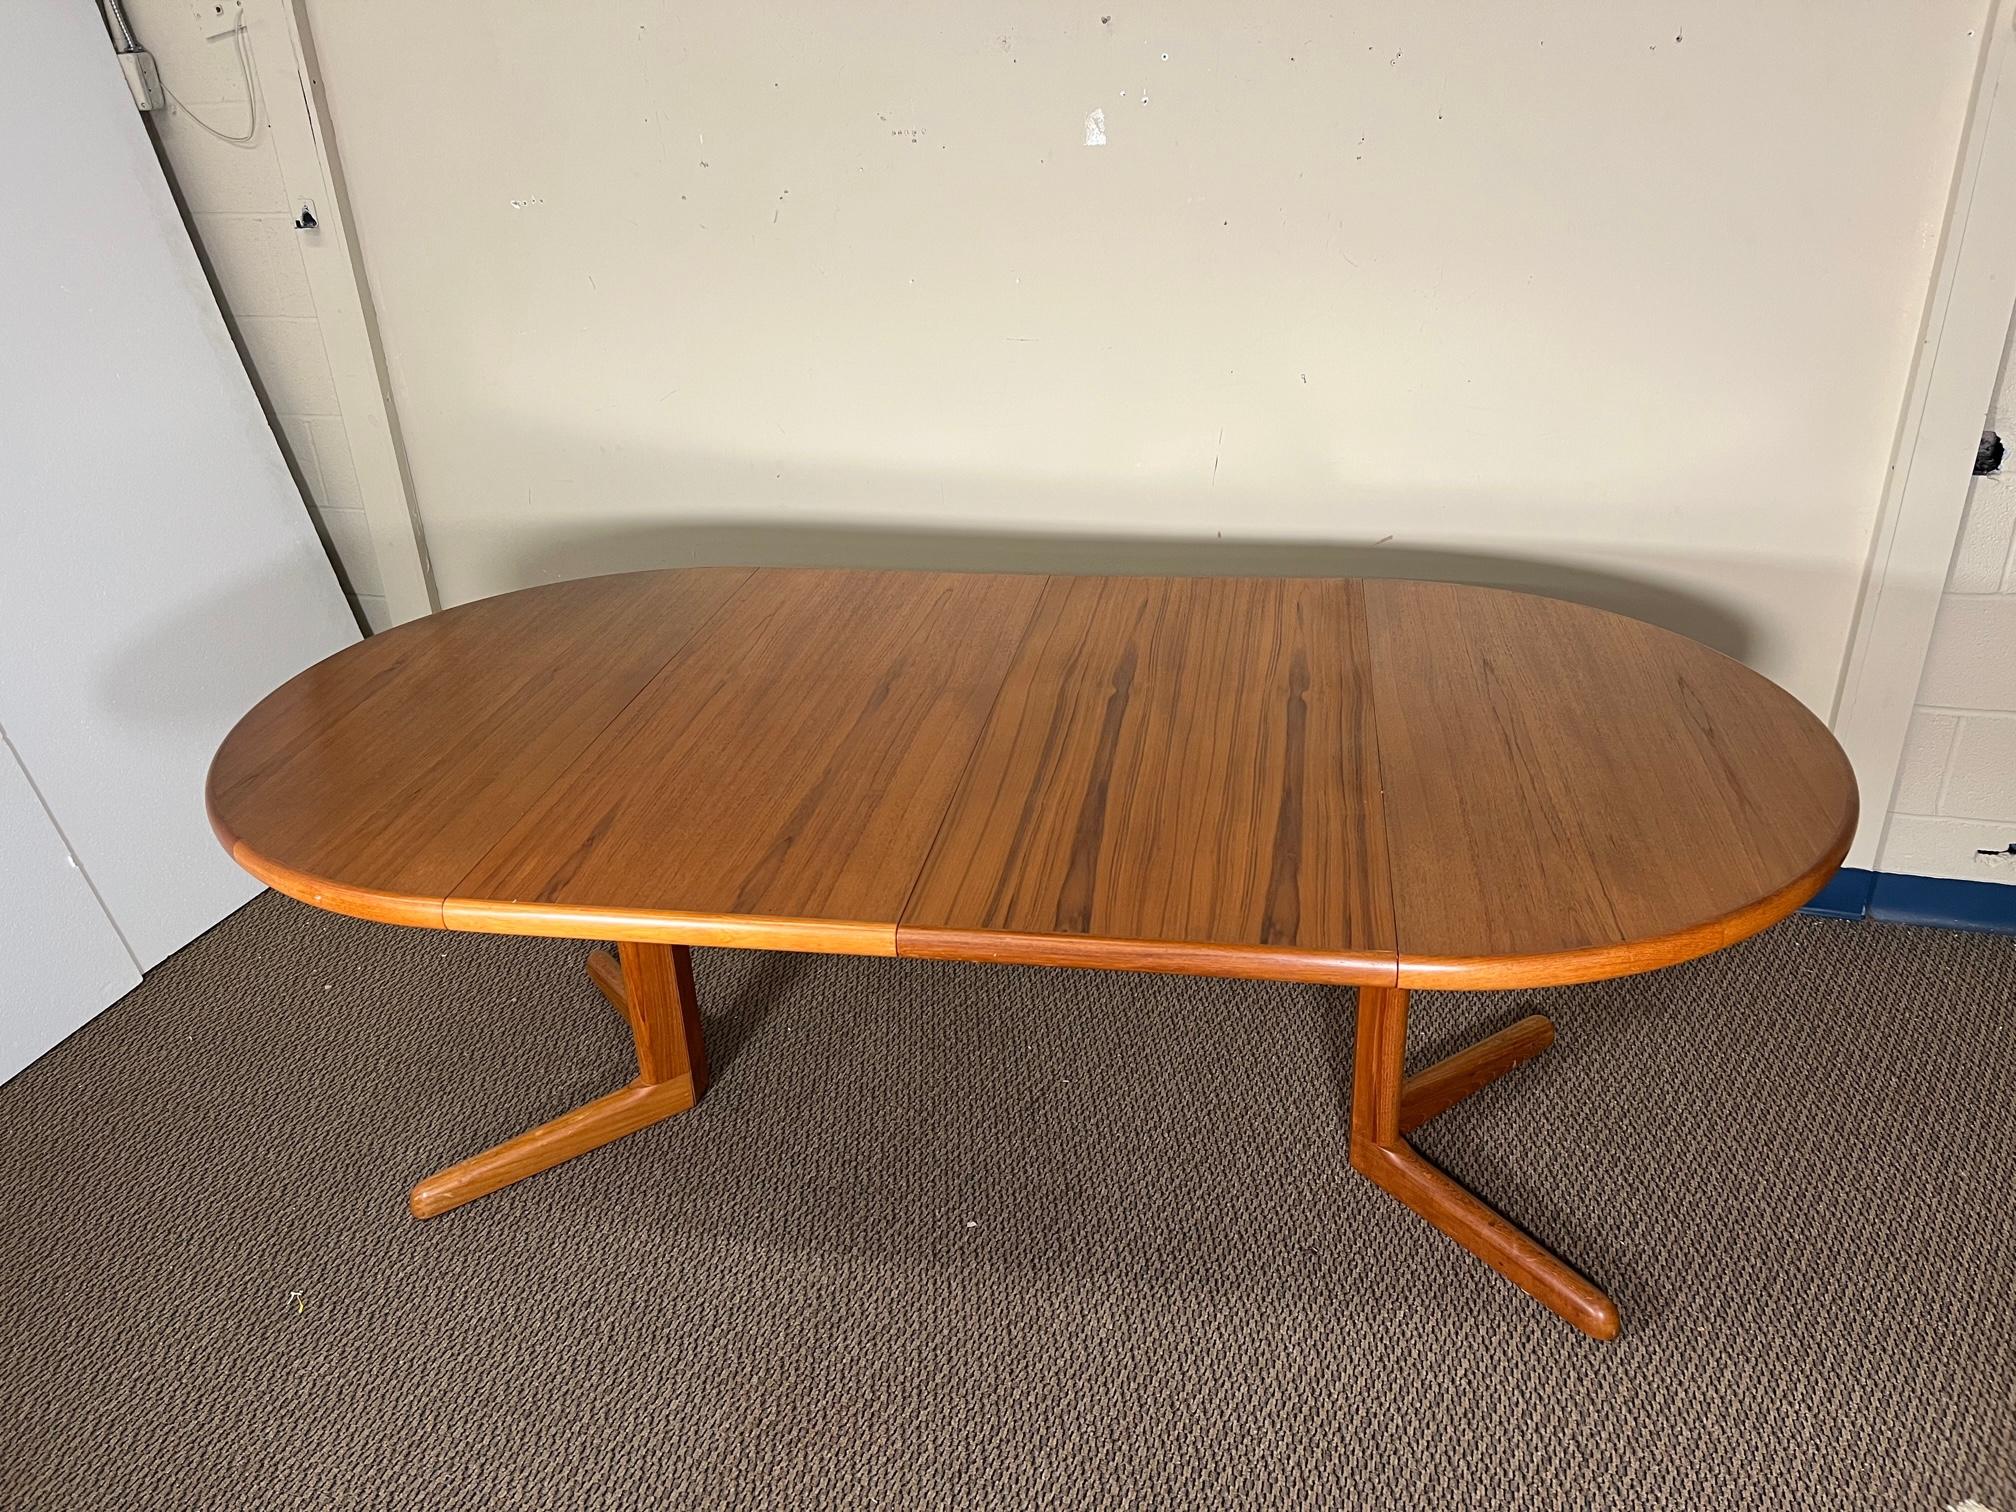 This is a round Danish teak dining table with 2 extension leaves. Seats 8 comfortably. Table only. Chairs and painting sold separately. 
Very nice condition. Veneer coming loose a little on one leaf. Slight color difference on leaves. 
Dimensions: